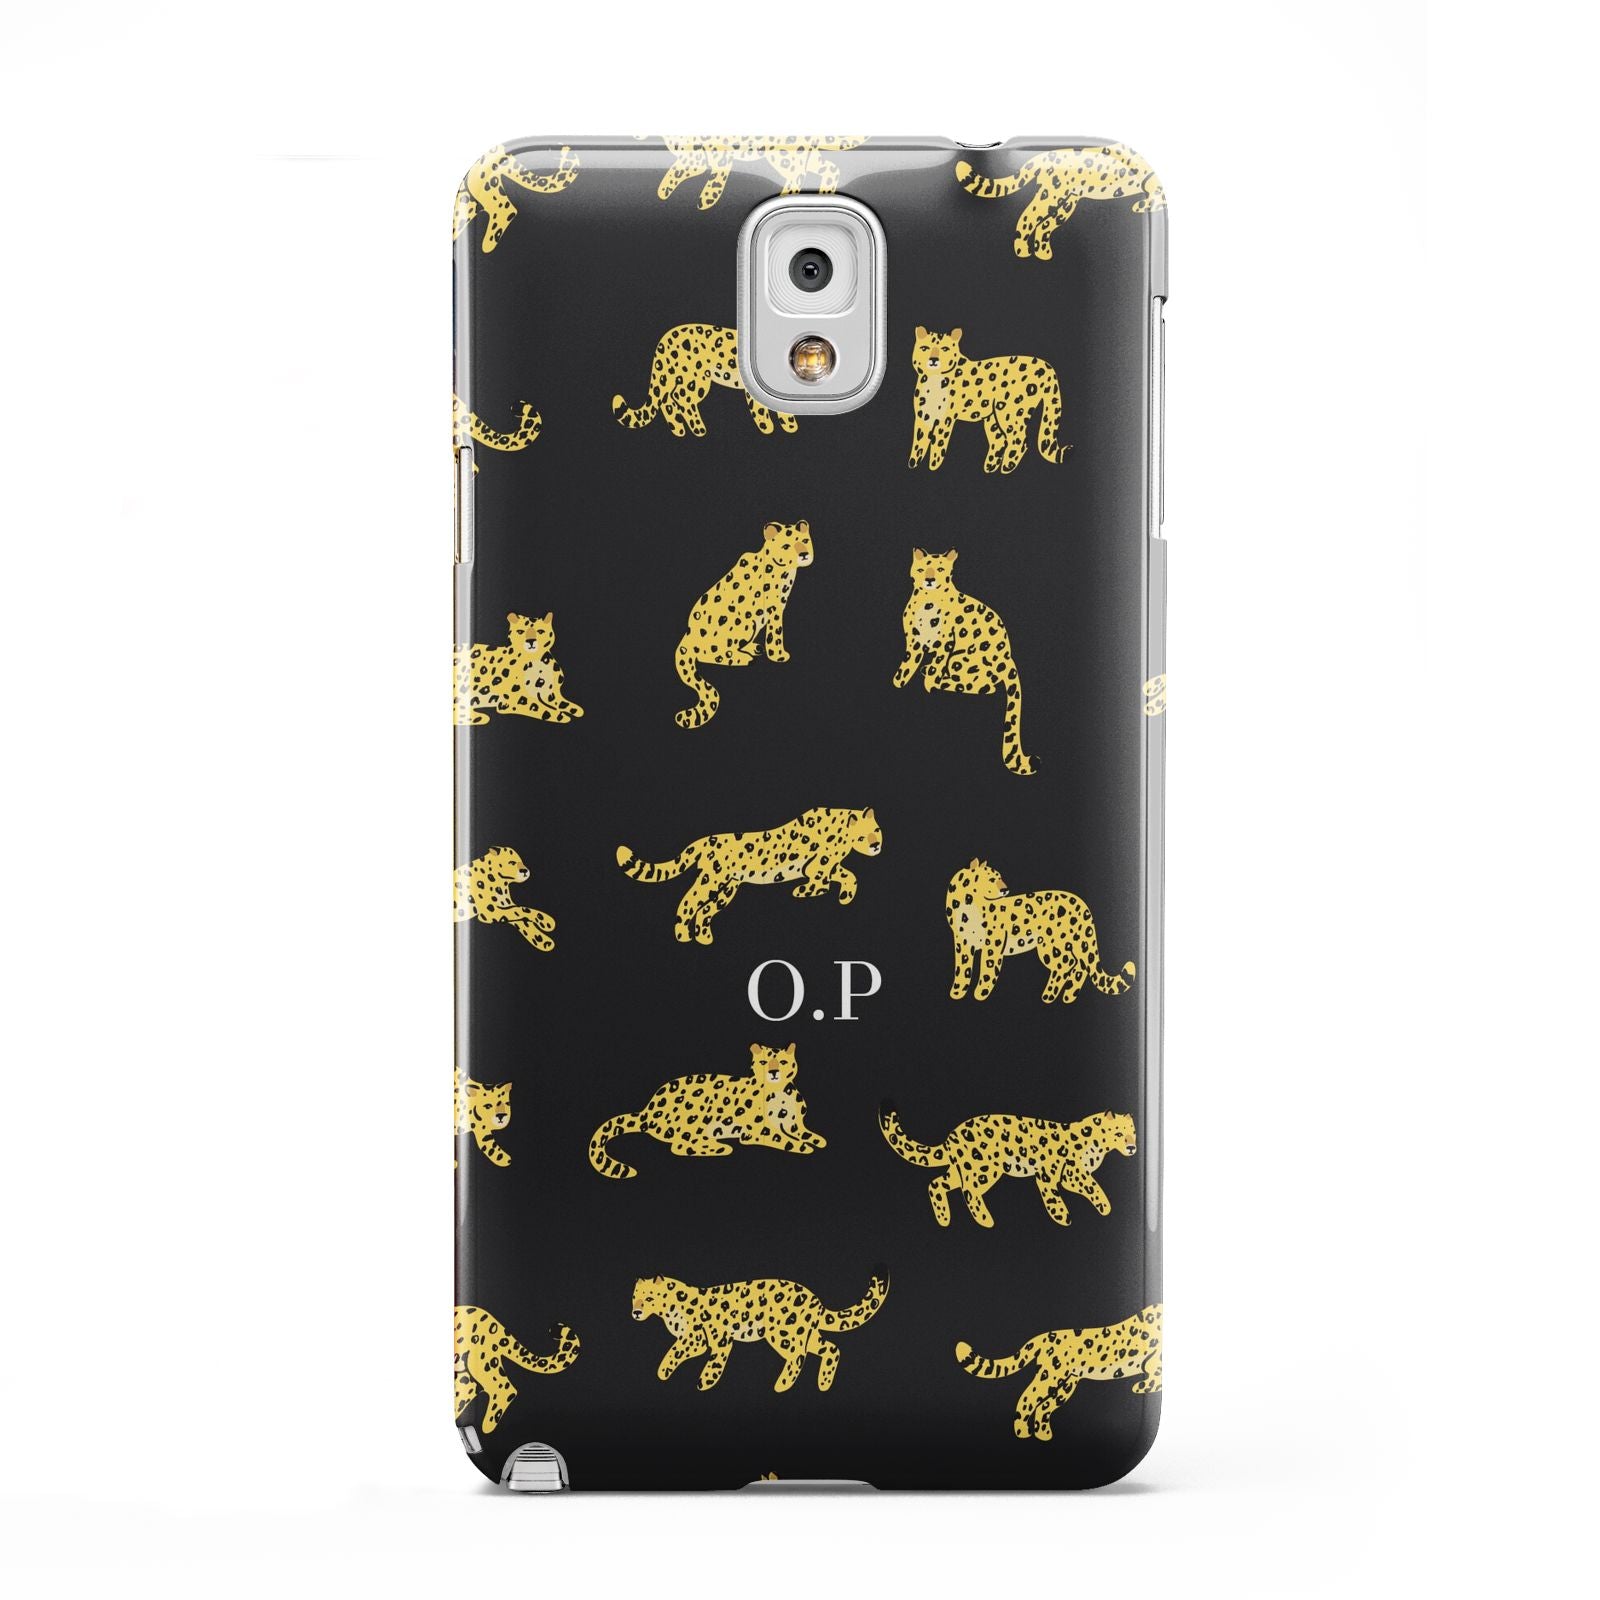 Prowling Leopard Samsung Galaxy Note 3 Case